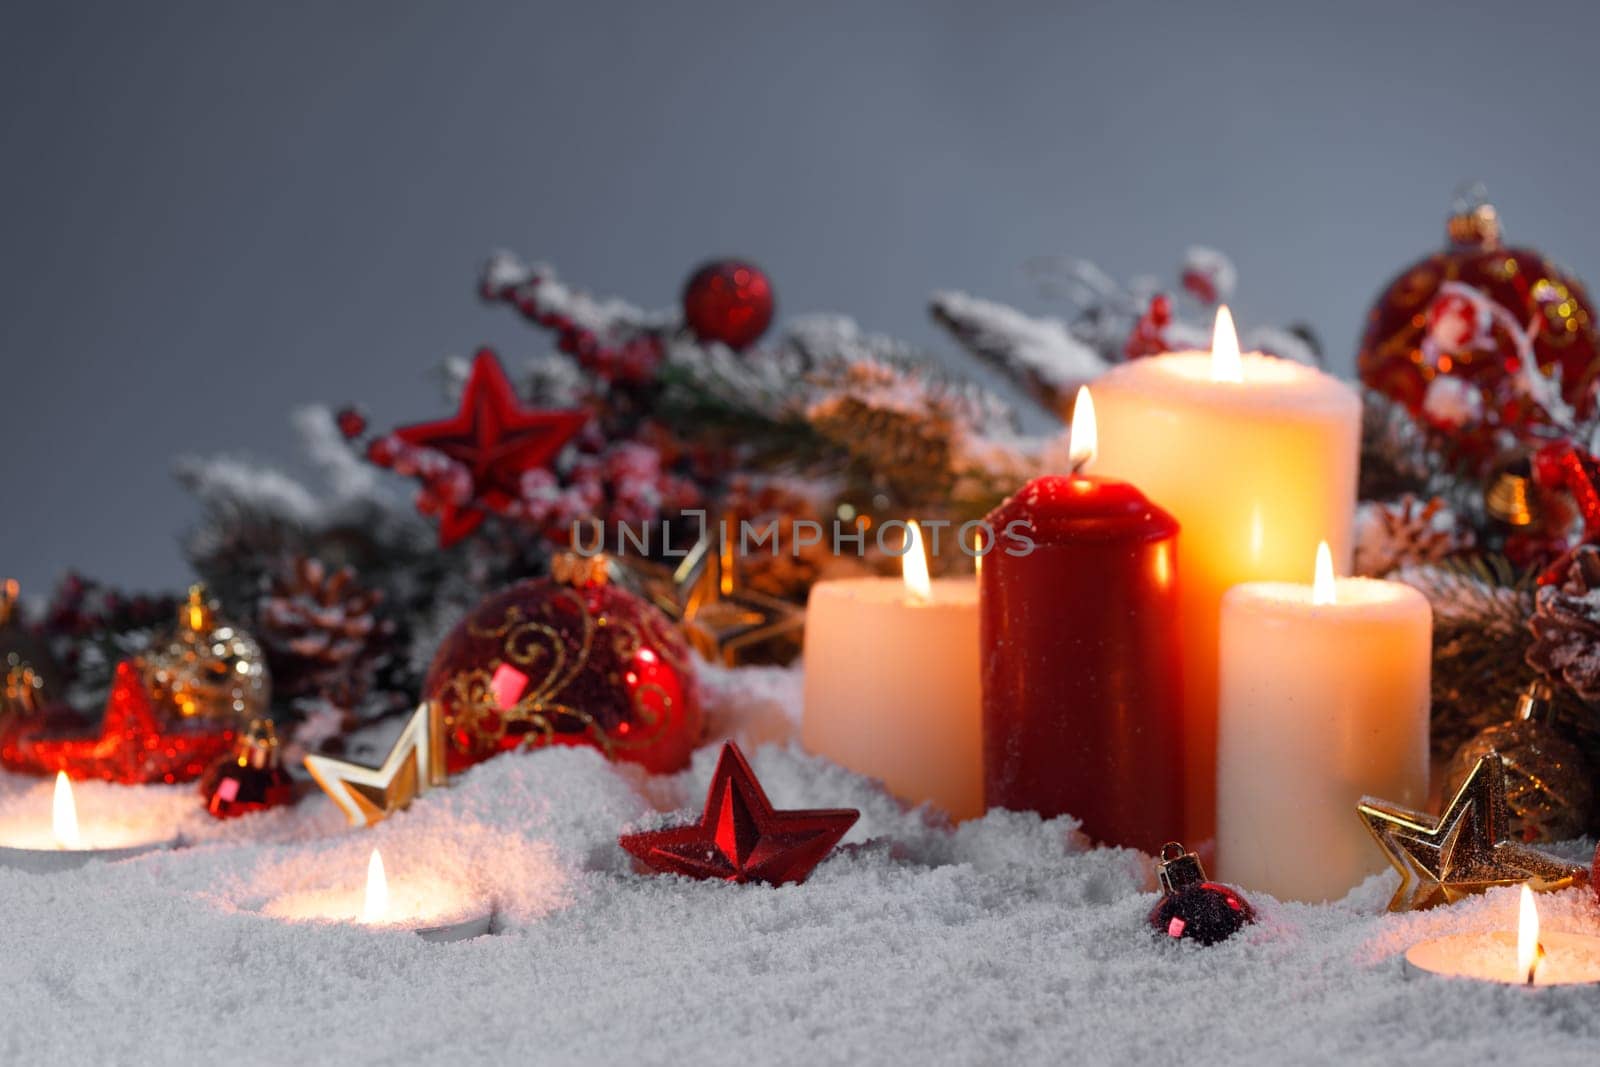 Christmas candles with decor by Yellowj